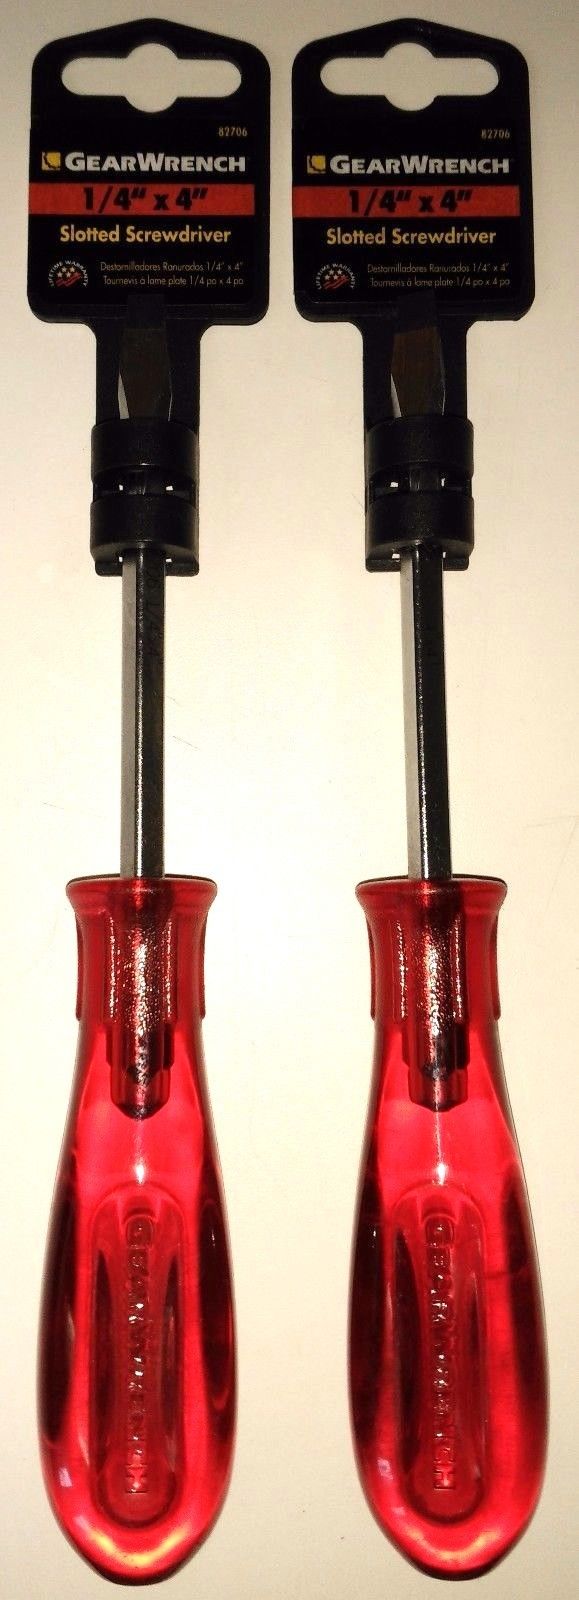 Gearwrench 82706 1/4 x 4 Slotted Screwdriver Magnetized 2PCS